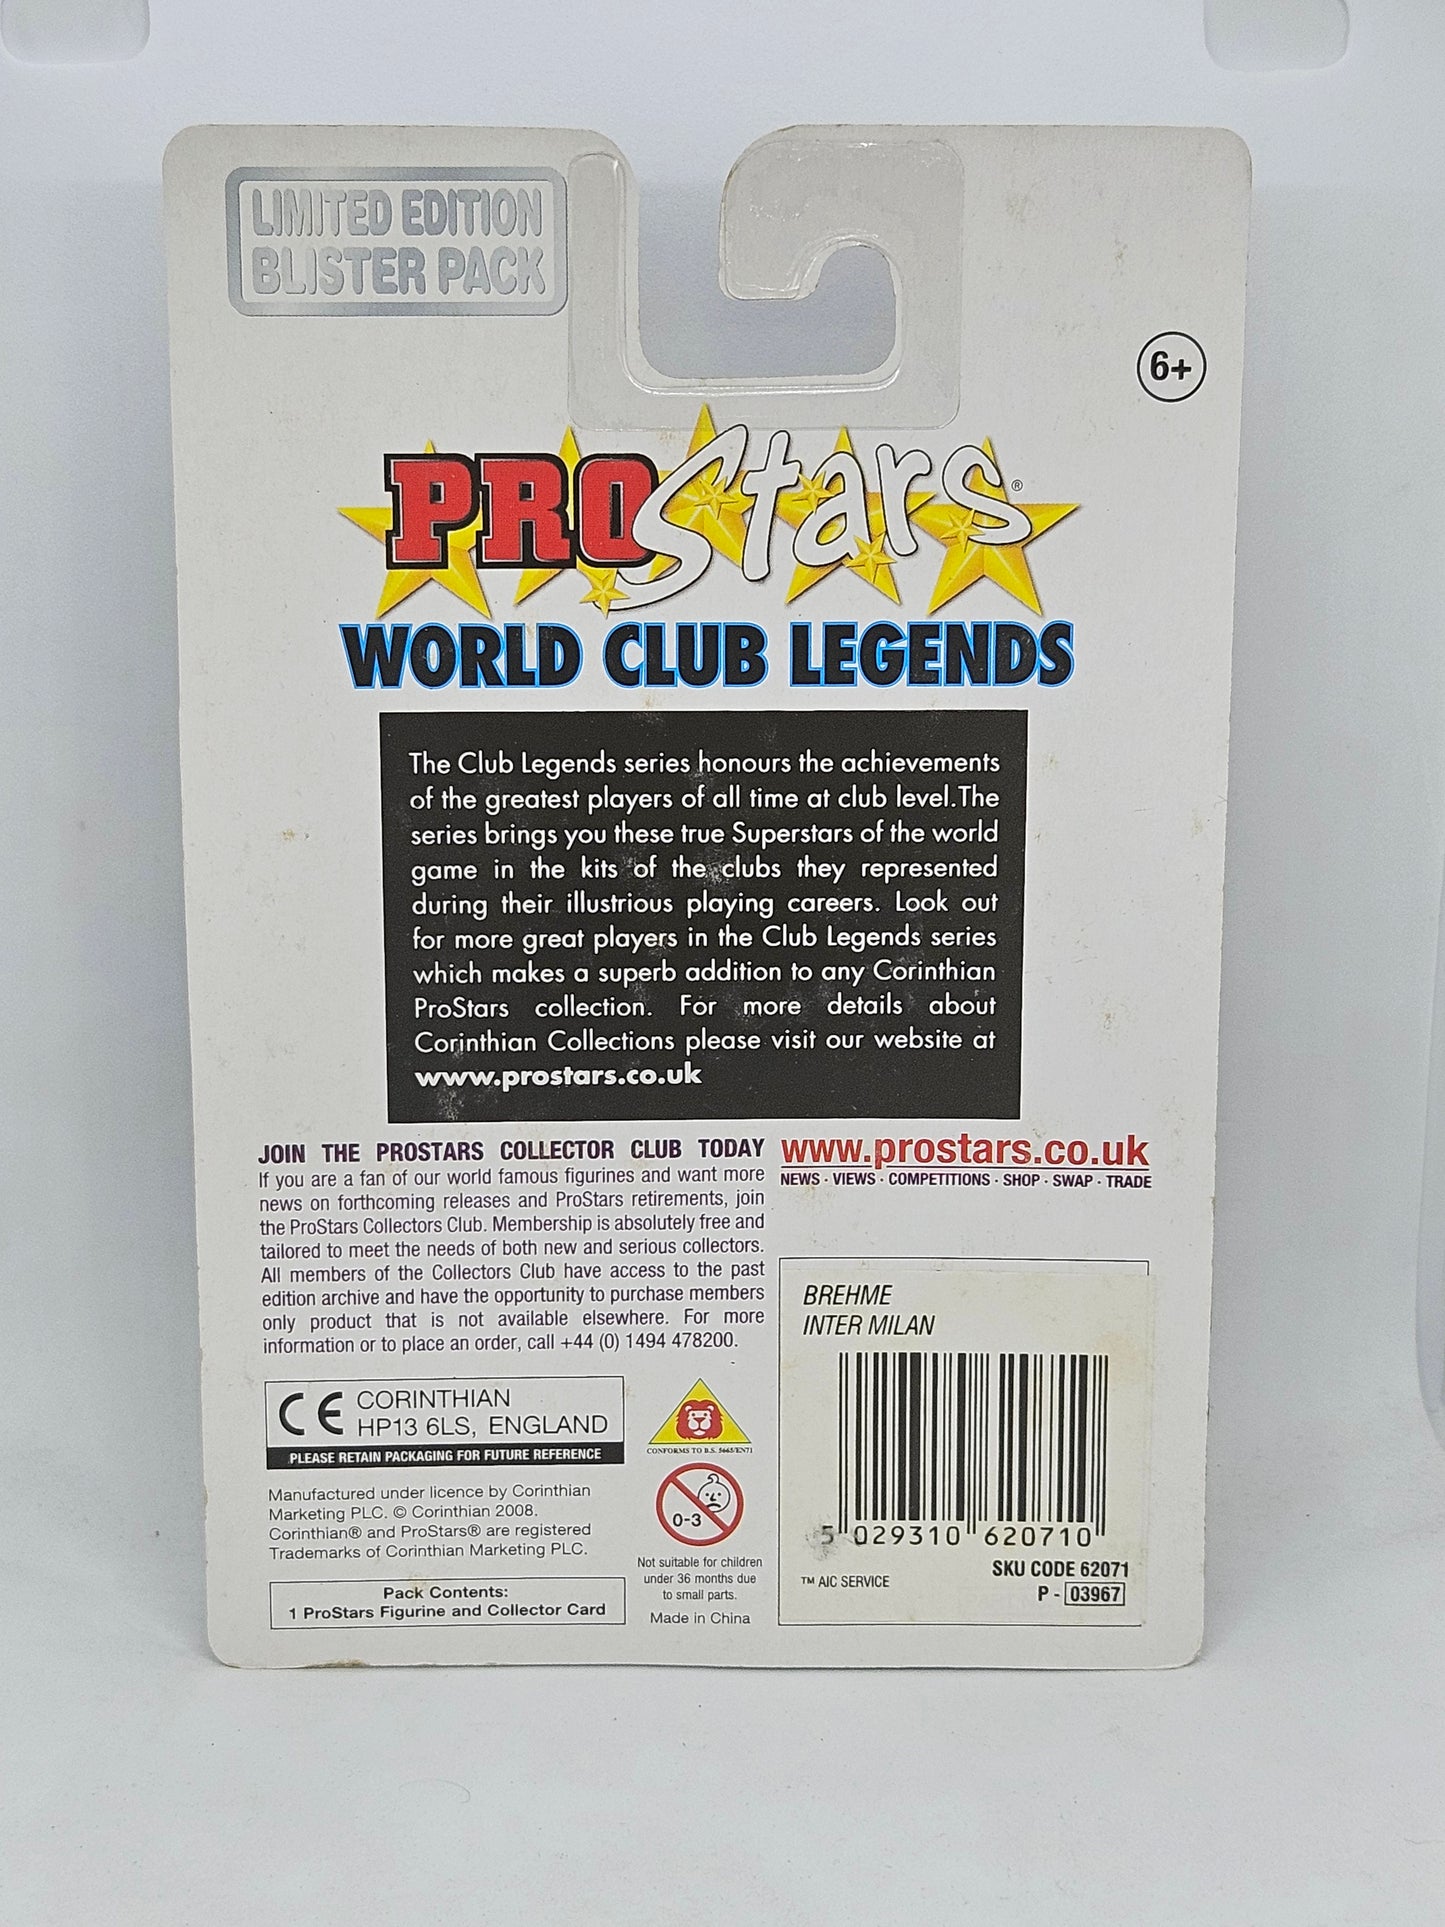 Andreas Brehme (Inter Milan) Pro Stars Blister Pack World Club Legends PRO1768